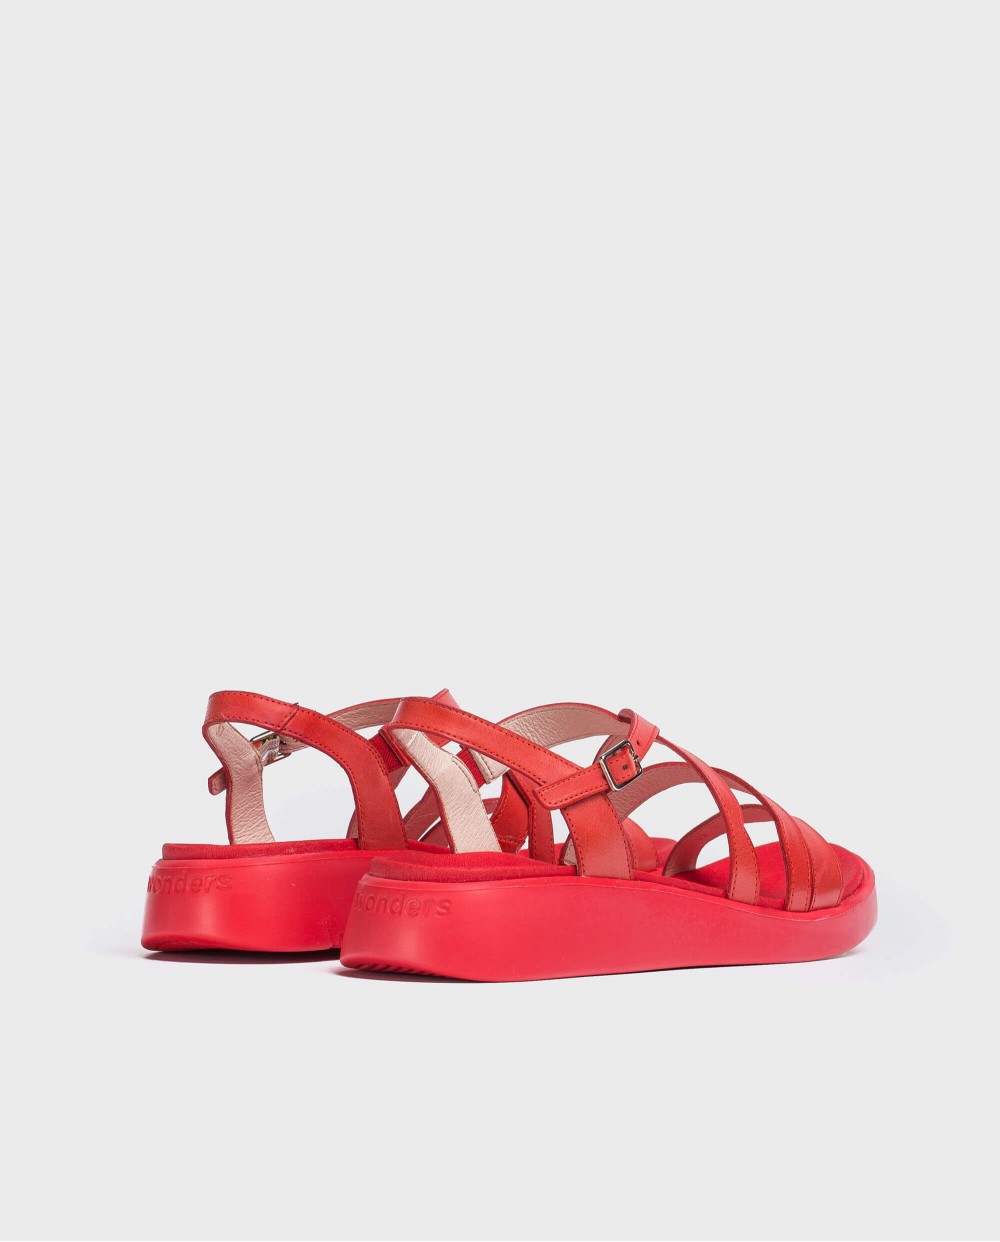 Wonders-Sandals-Flat sandal with waves